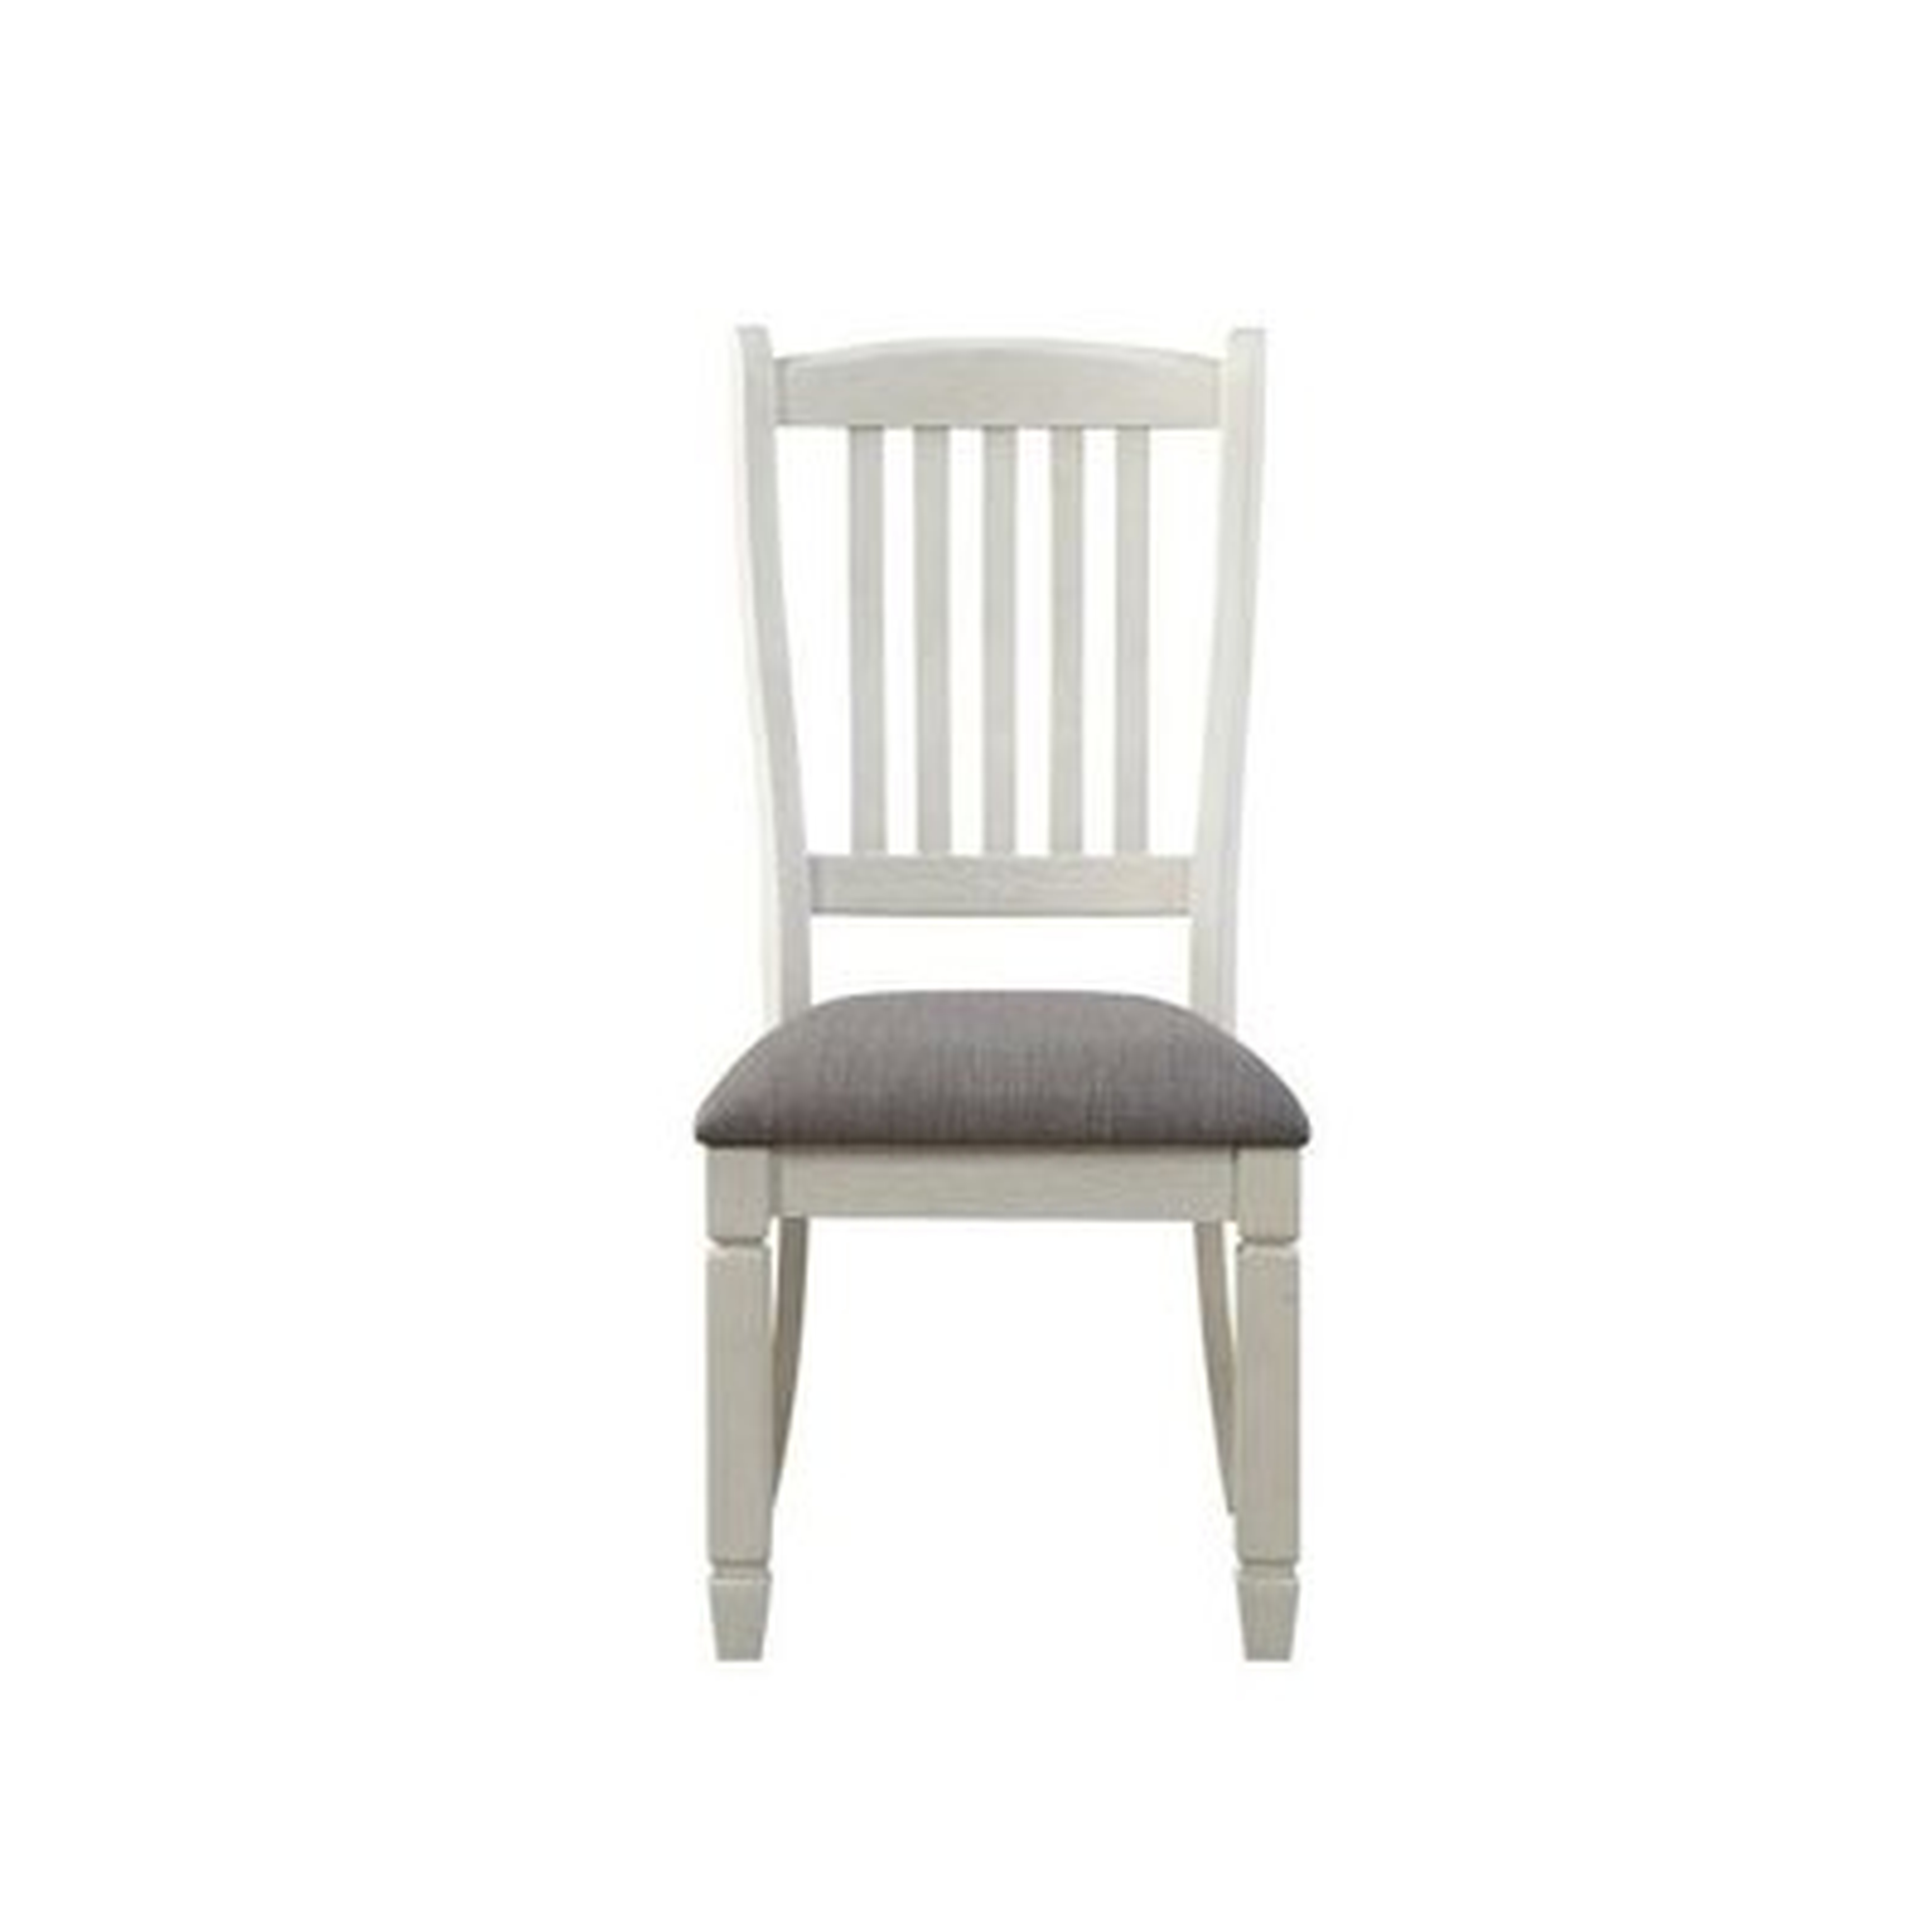 Kaley Upholstered Dining Chair (Set of 2) - Birch Lane